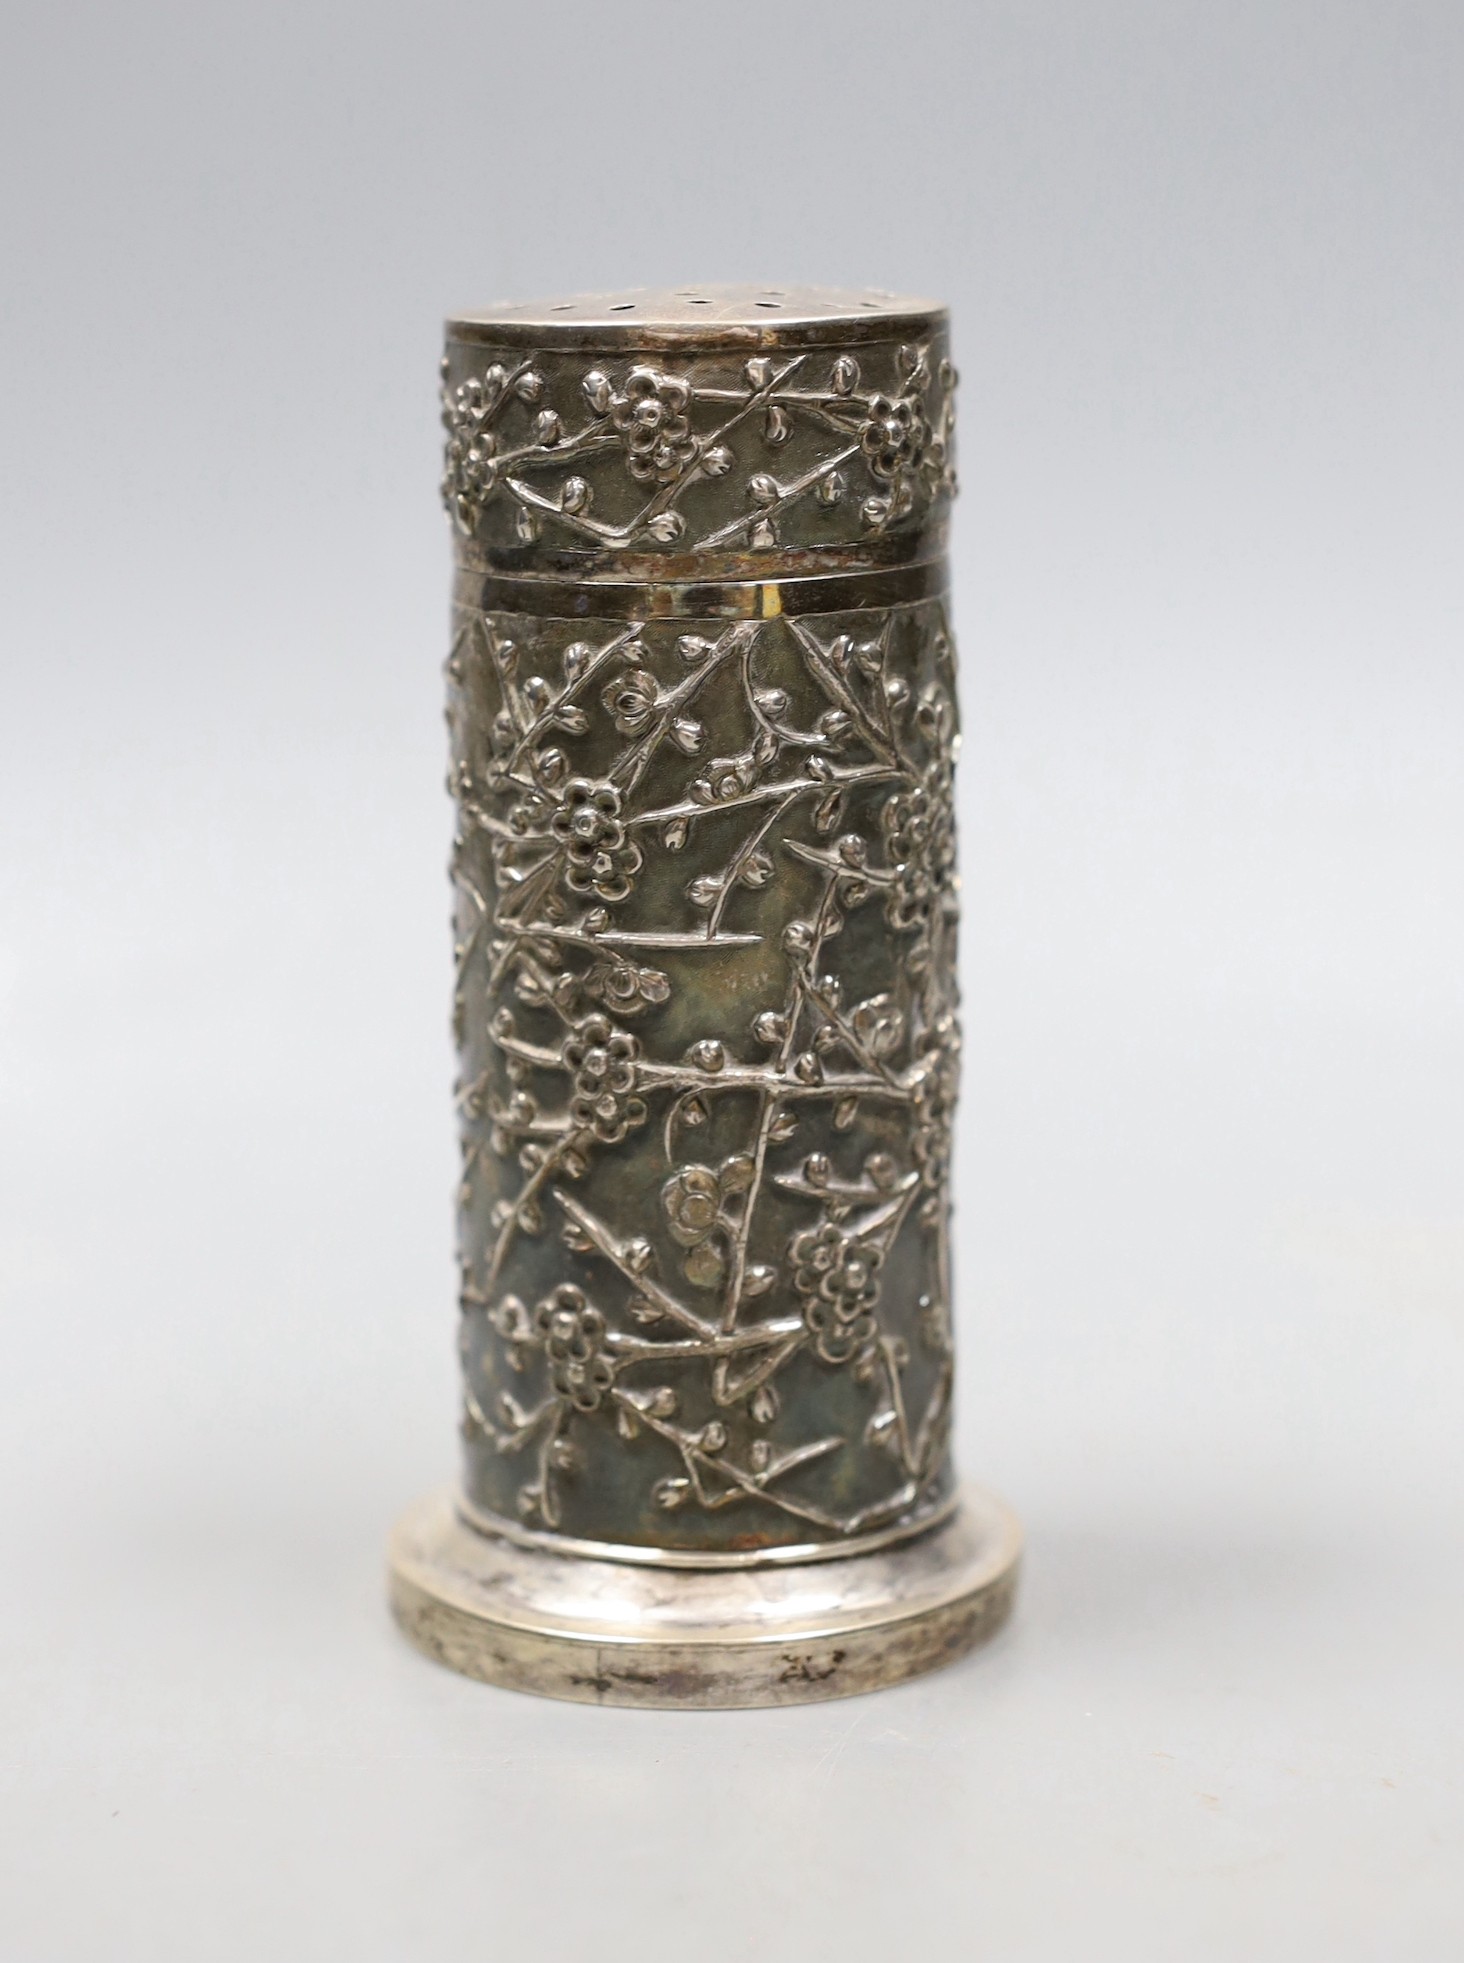 A late 19th/early 20th century Chinese Export white metal cylindrical sugar caster by Wang Hing, Hong Kong, decorated with prunus, 12.1cm, 170 grams.